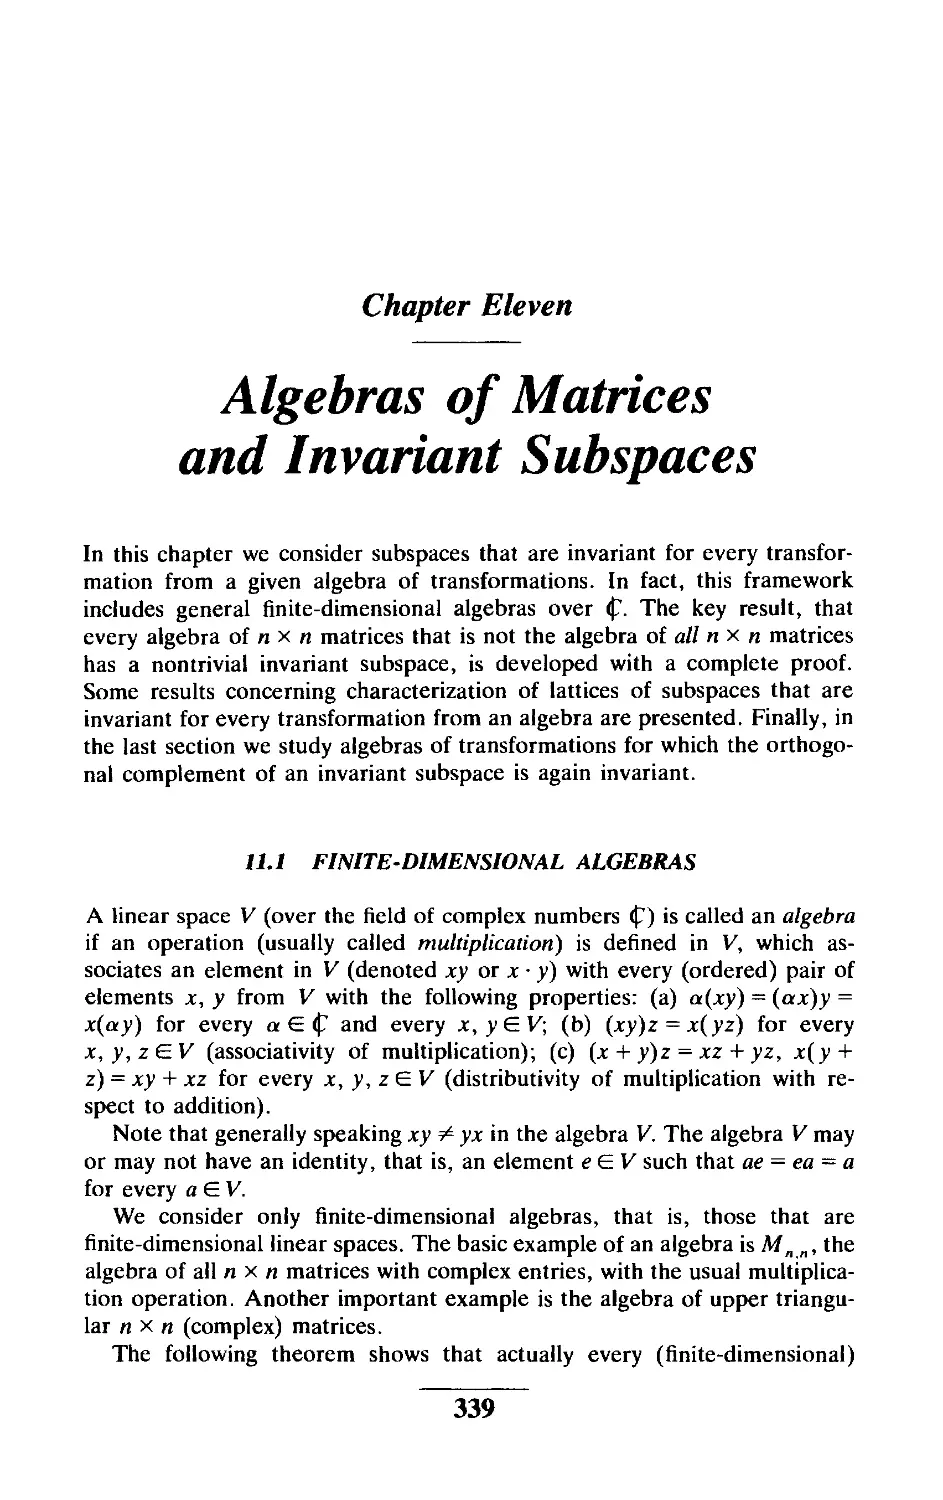 Chapter Eleven Algebras of Matrices and Invariant Subspaces